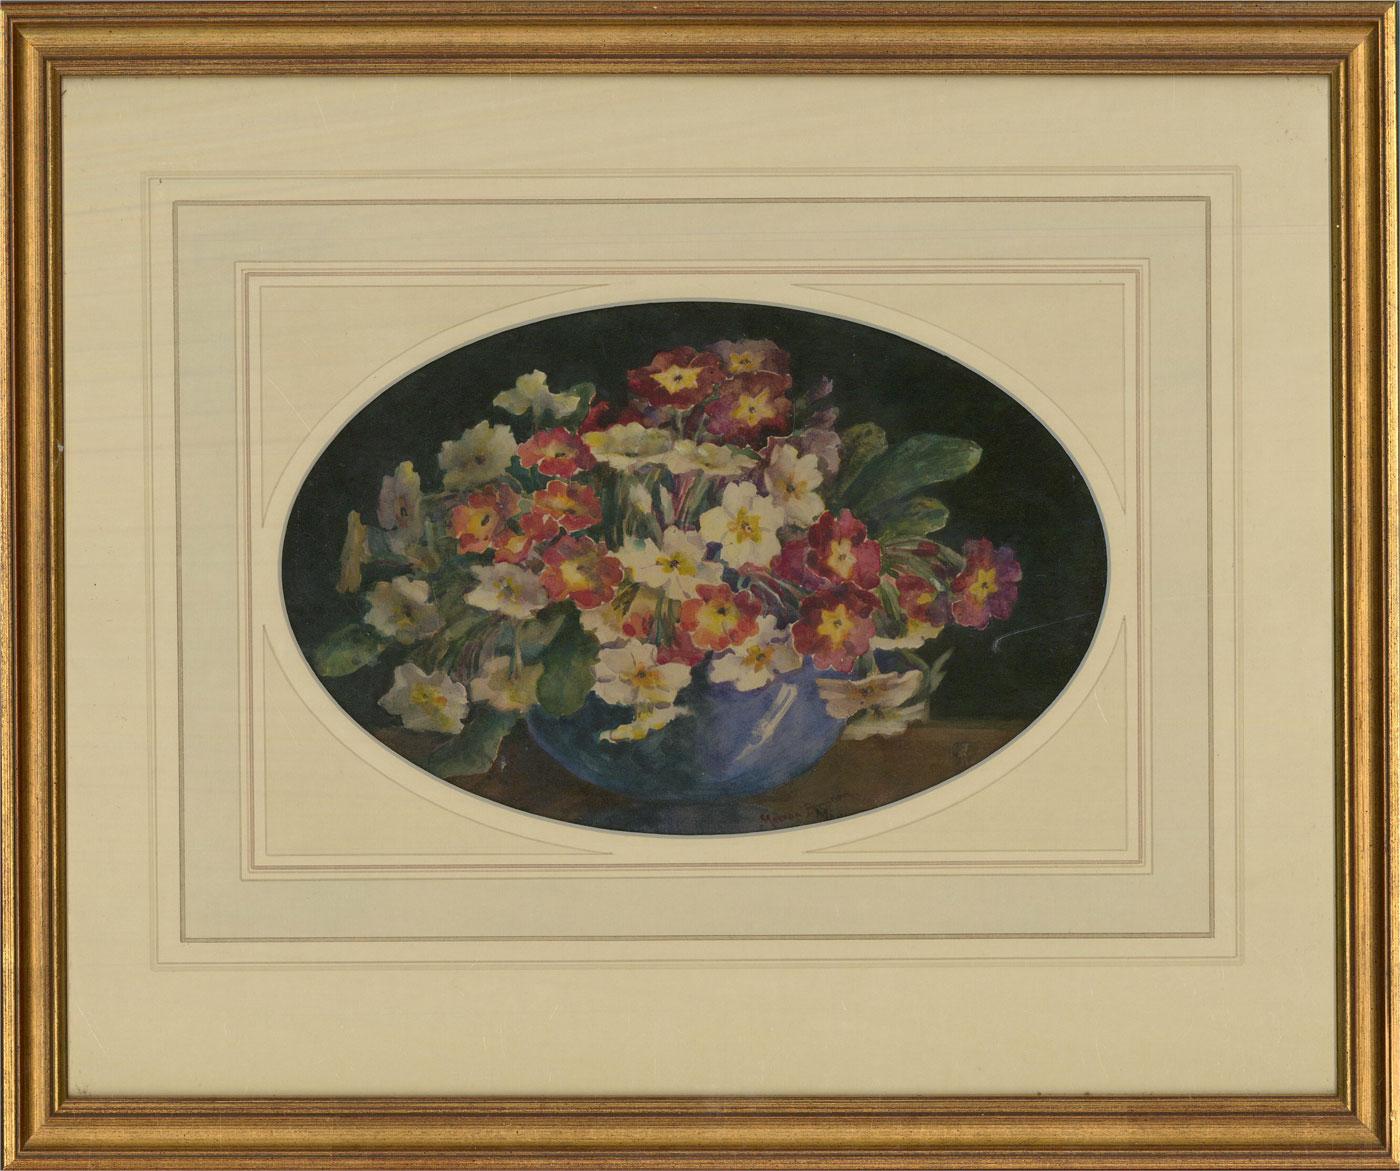 An attractive watercolour painting by the artist Marion Broom, depicting a blue vase with flowers. Signed to the lower margin. Well-presented in an oval, wash line card mount and in a distressed, gilt-effect frame. On watercolour paper.
